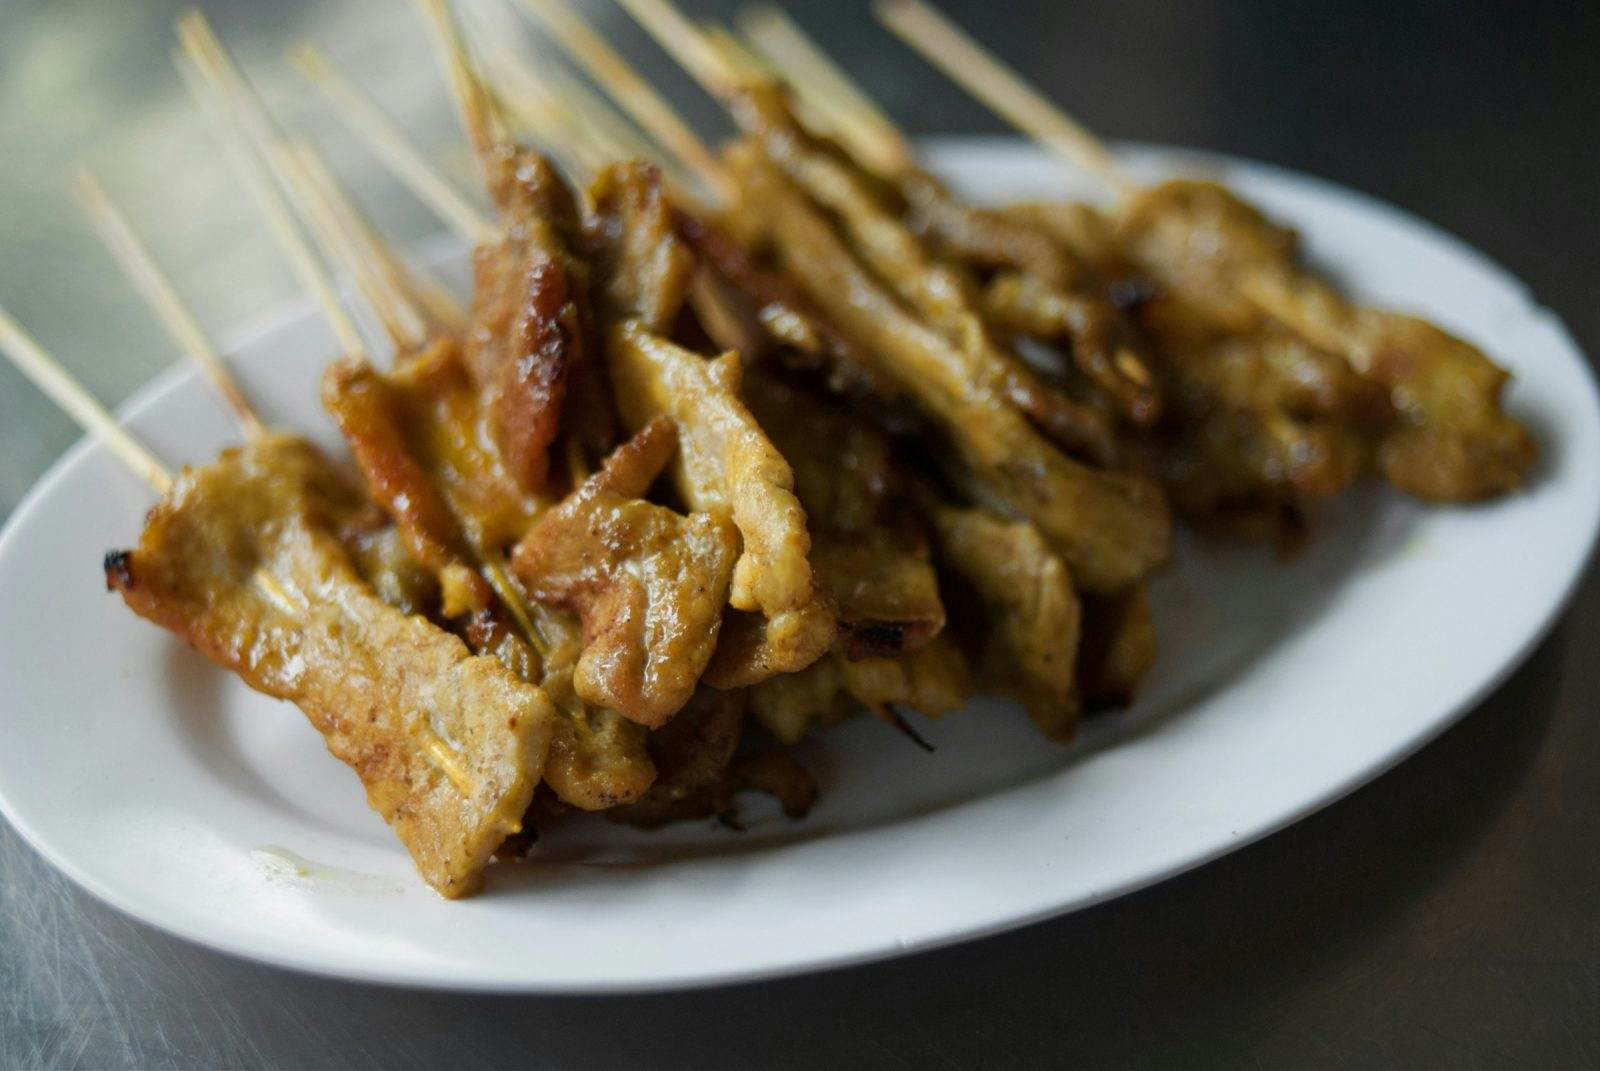 Top 12 must-try Bangkok dishes - Lonely Planet